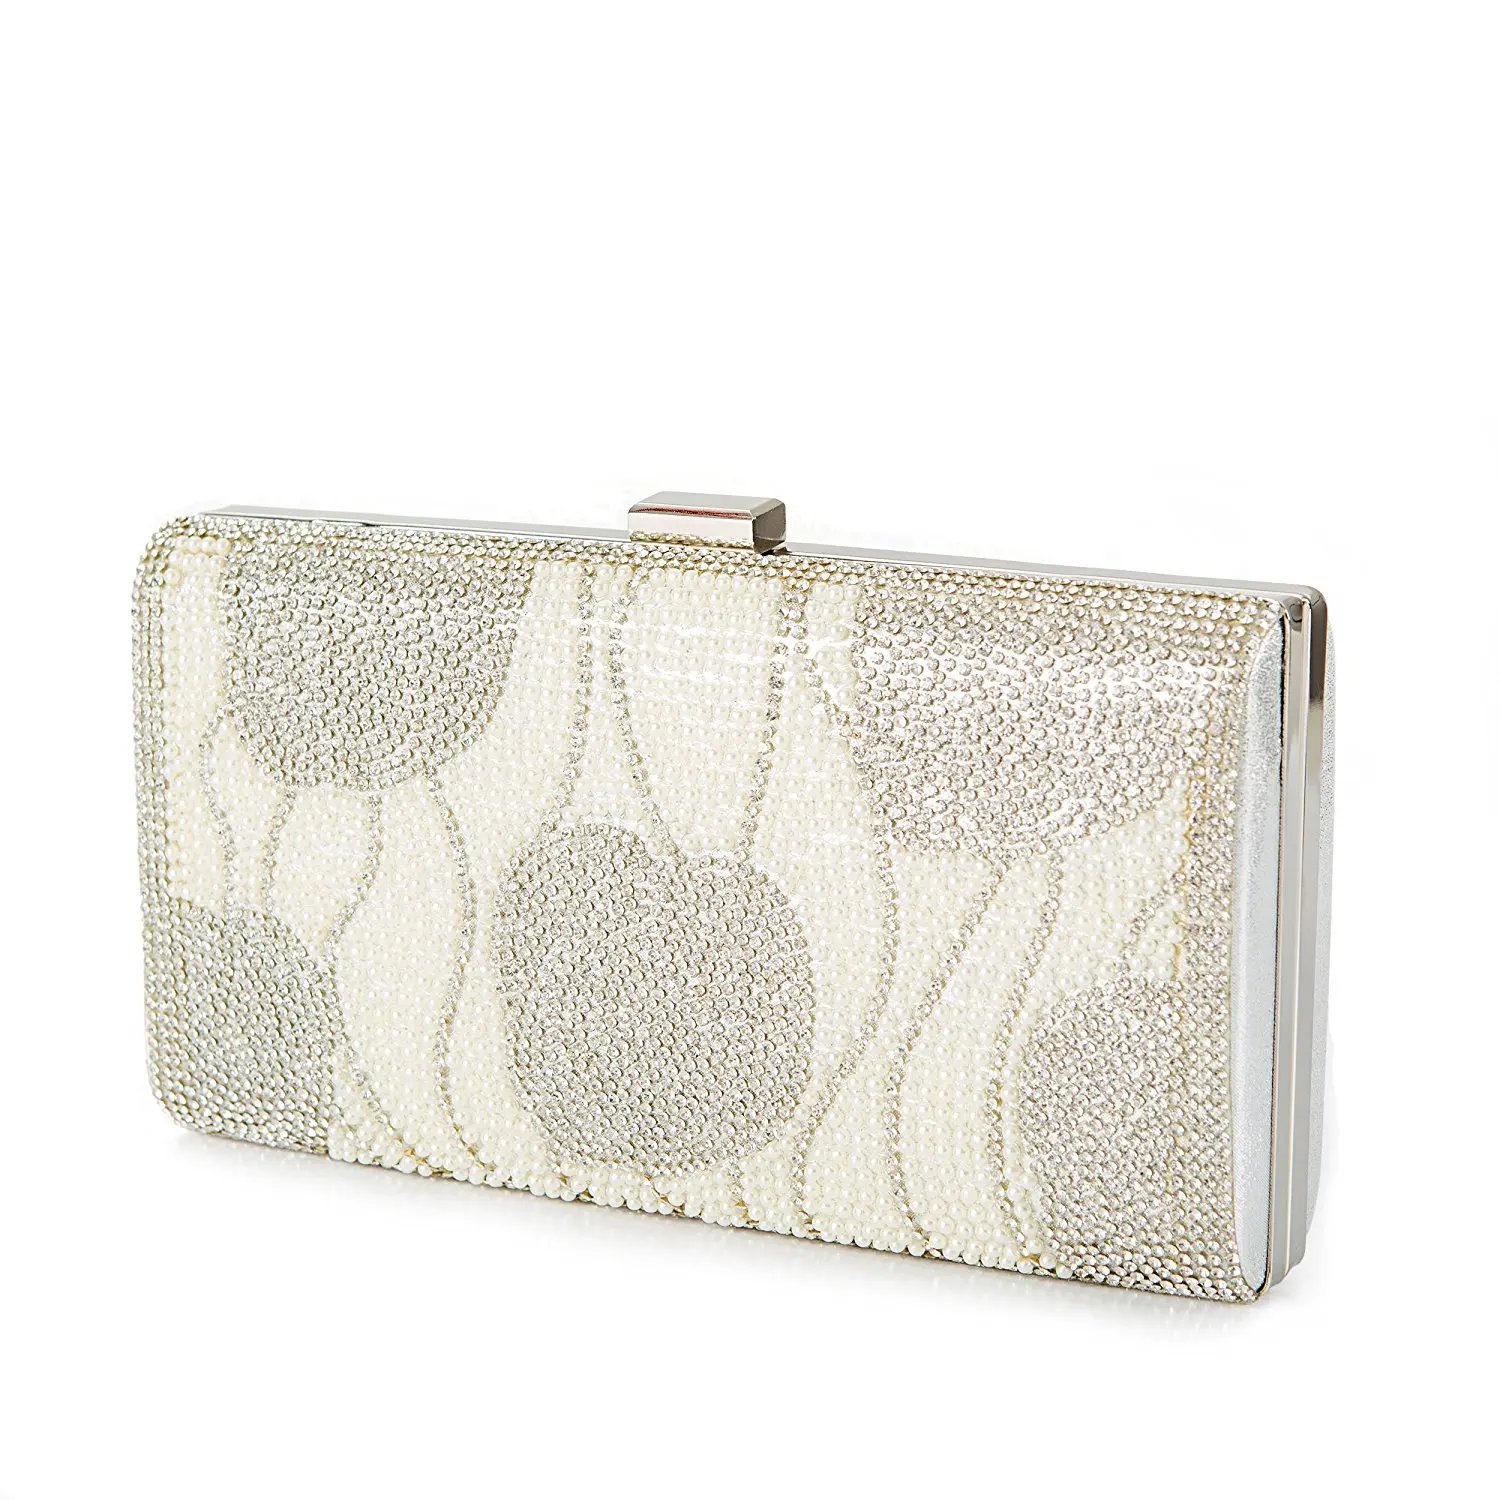 Cheap Prom Clutch Bag Find Prom Clutch Bag Deals On Line At Alibaba Com